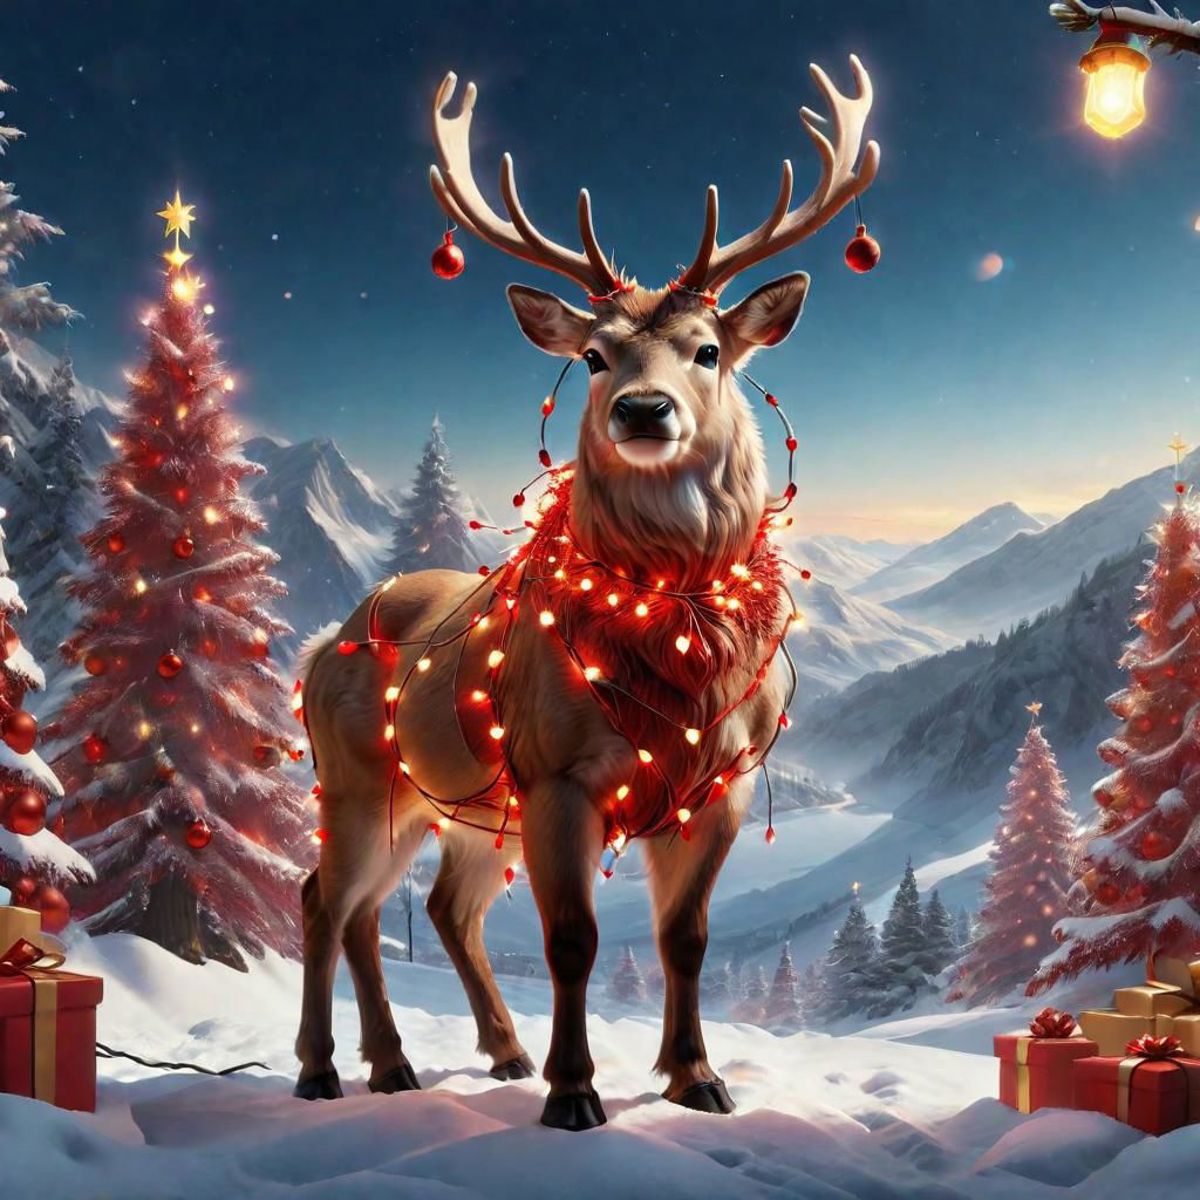 Animated Christmas Deer with Lights in Snowy Landscape